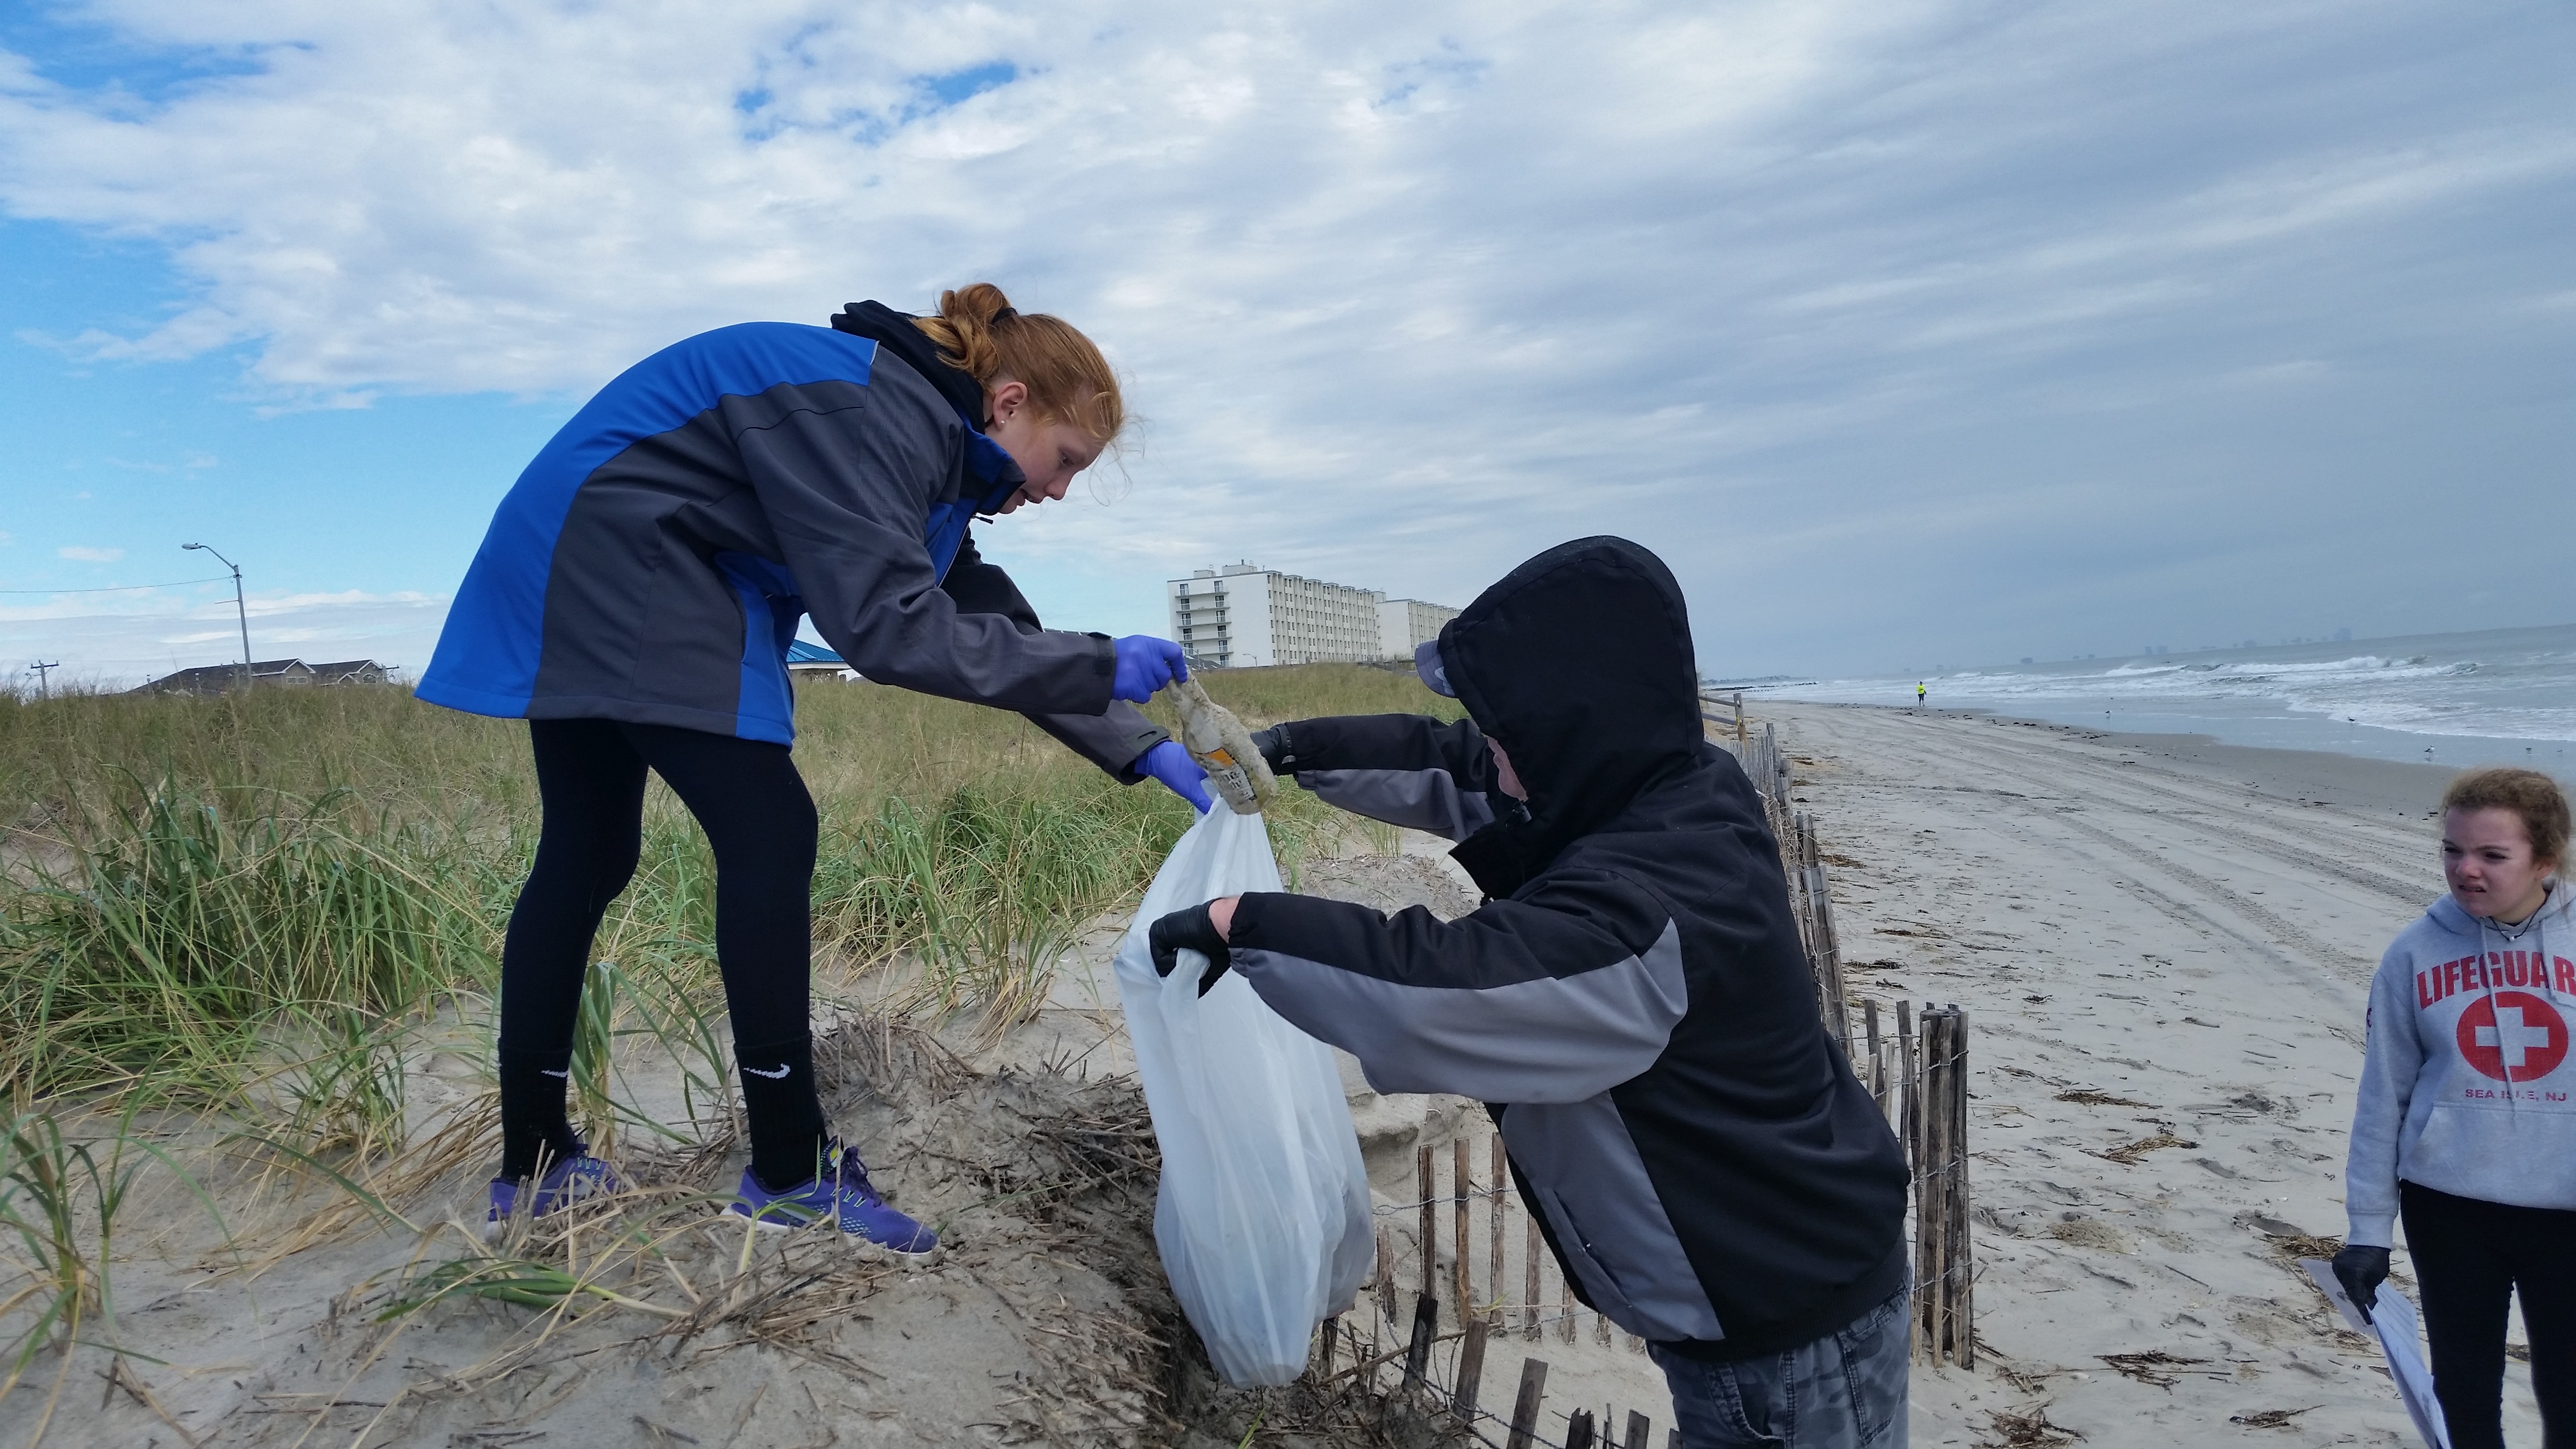 1.4 beach cleanup father and daughter | OCNJ Daily